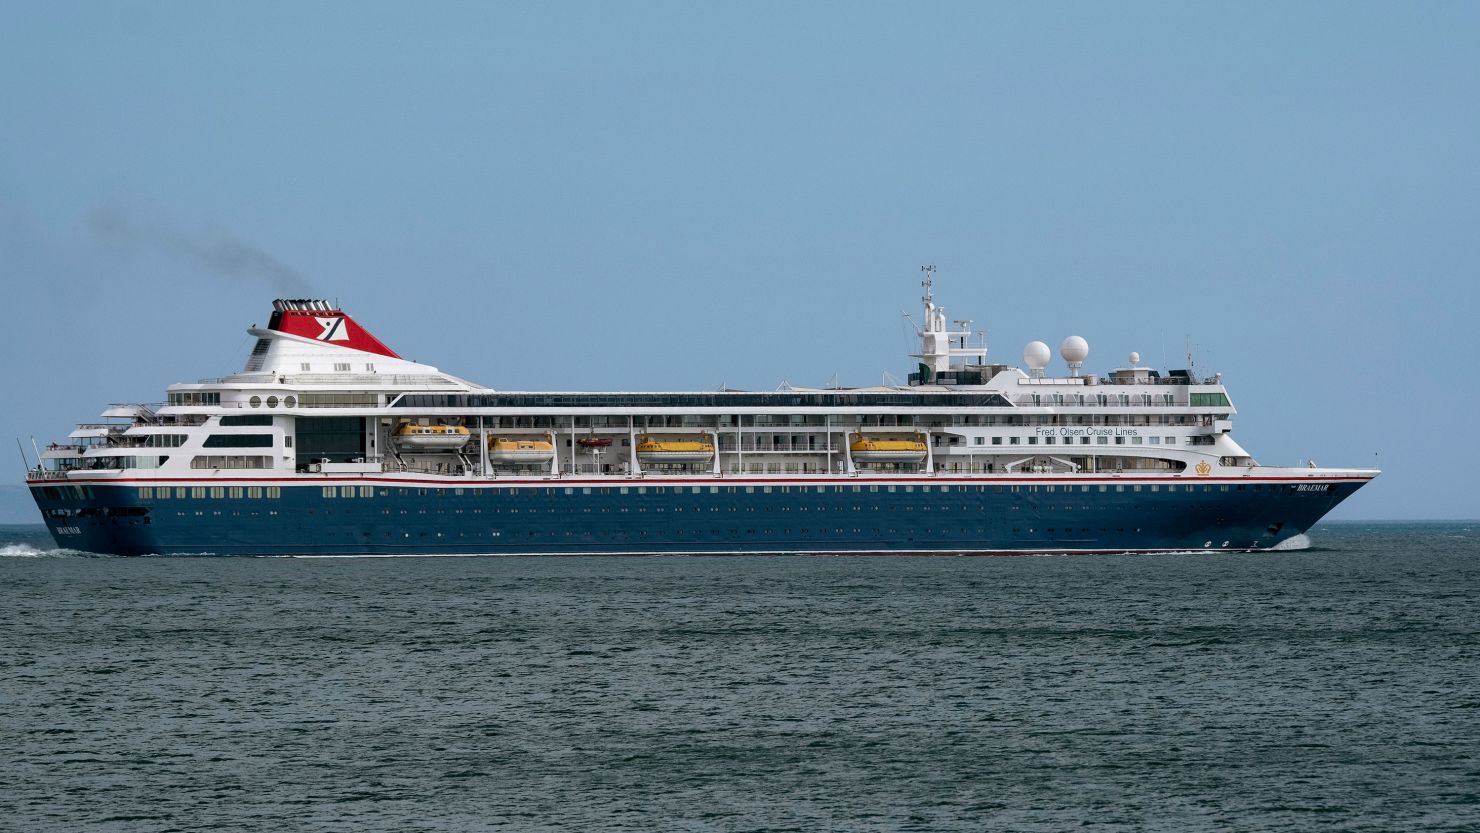 The Braemar cruise ship, pictured in 2018, is stranded off coast of the Bahamas with five confirmed coronavirus cases on board.